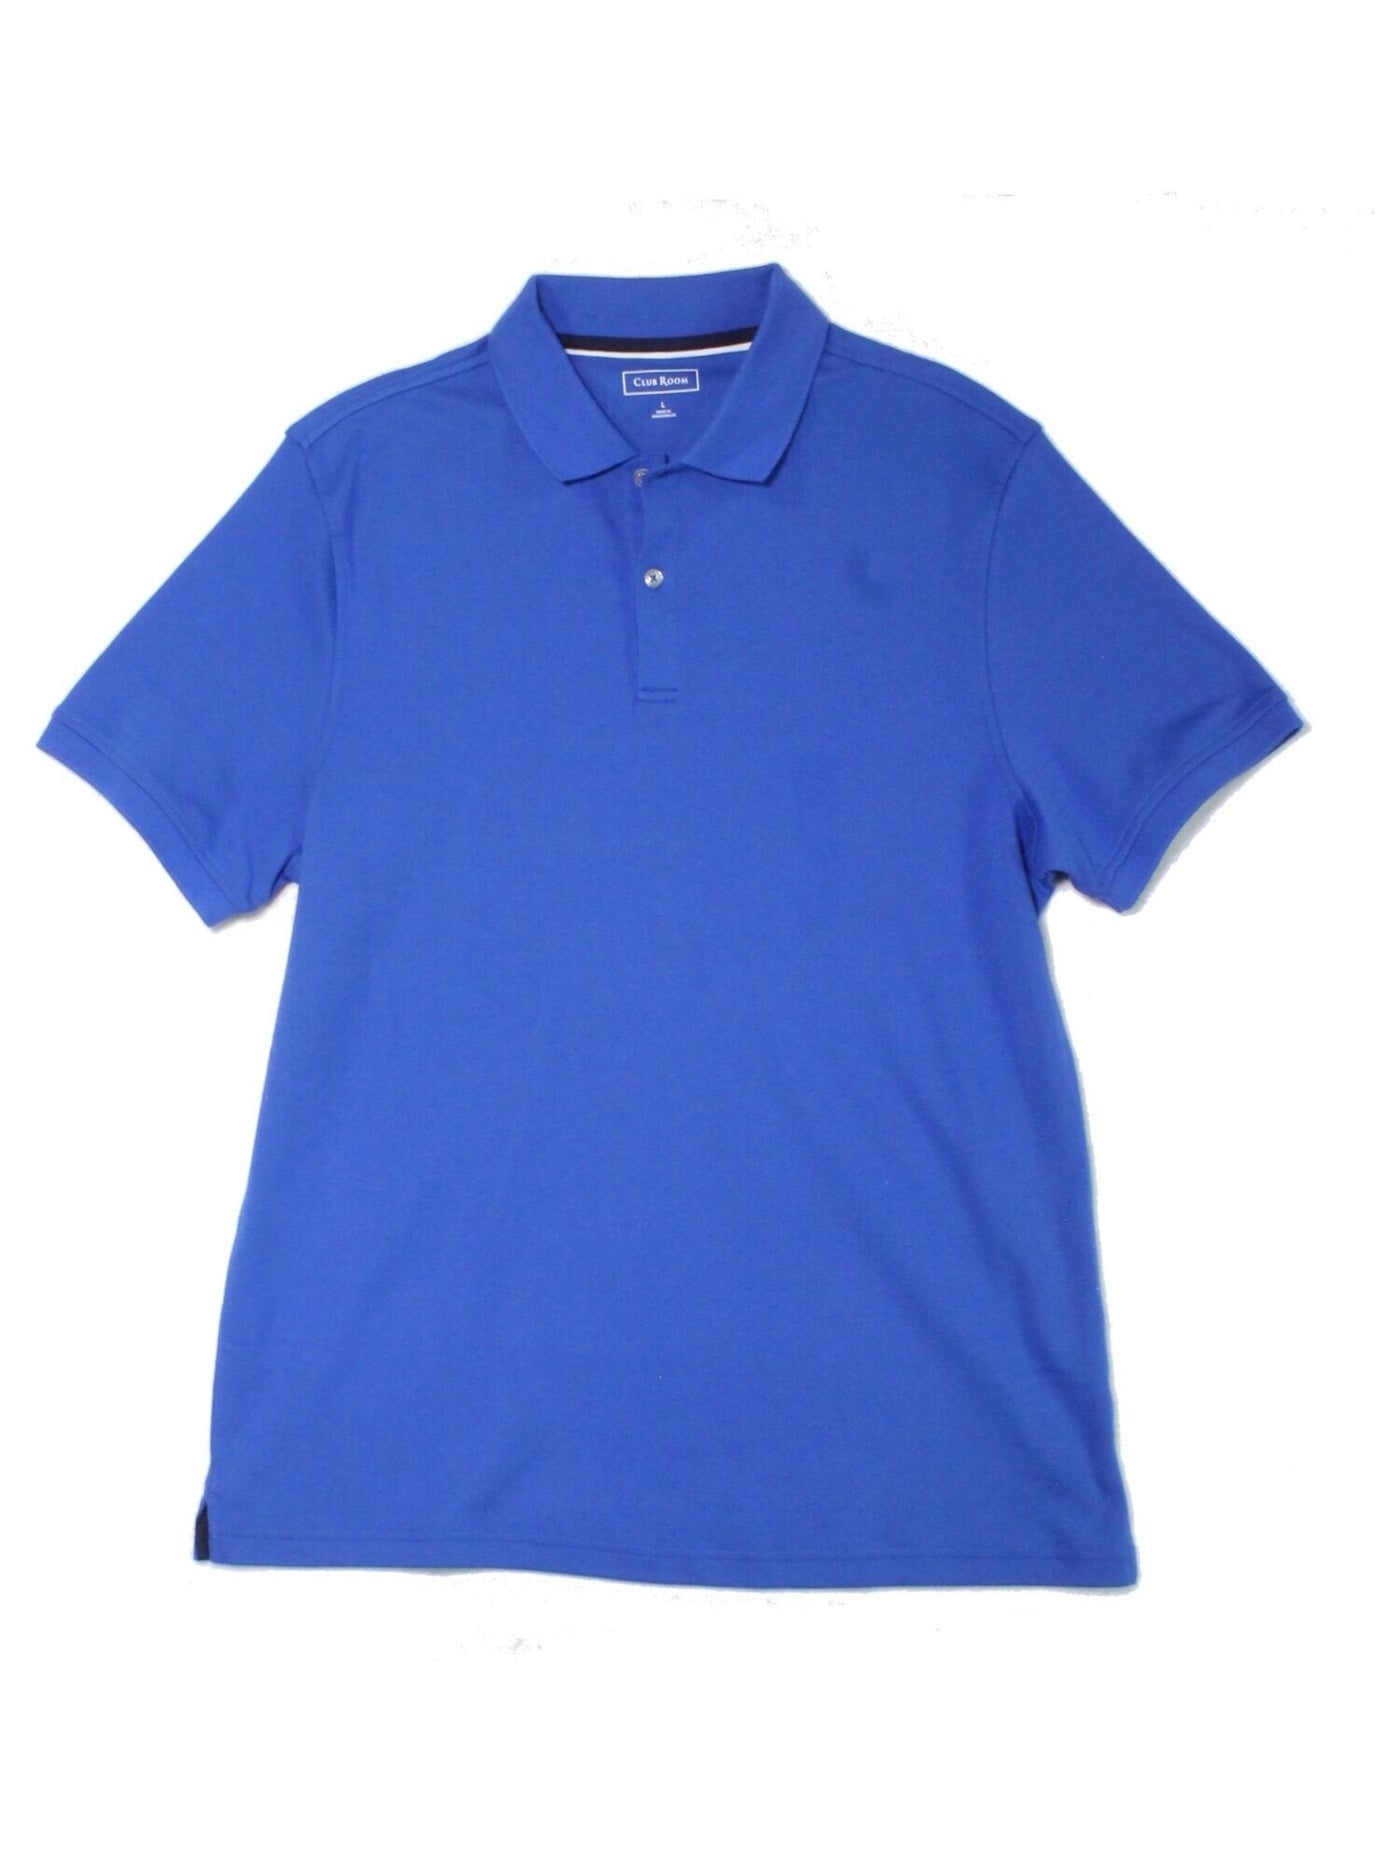 CLUBROOM Mens Soft Touch Interlock Blue Classic Fit Polo S